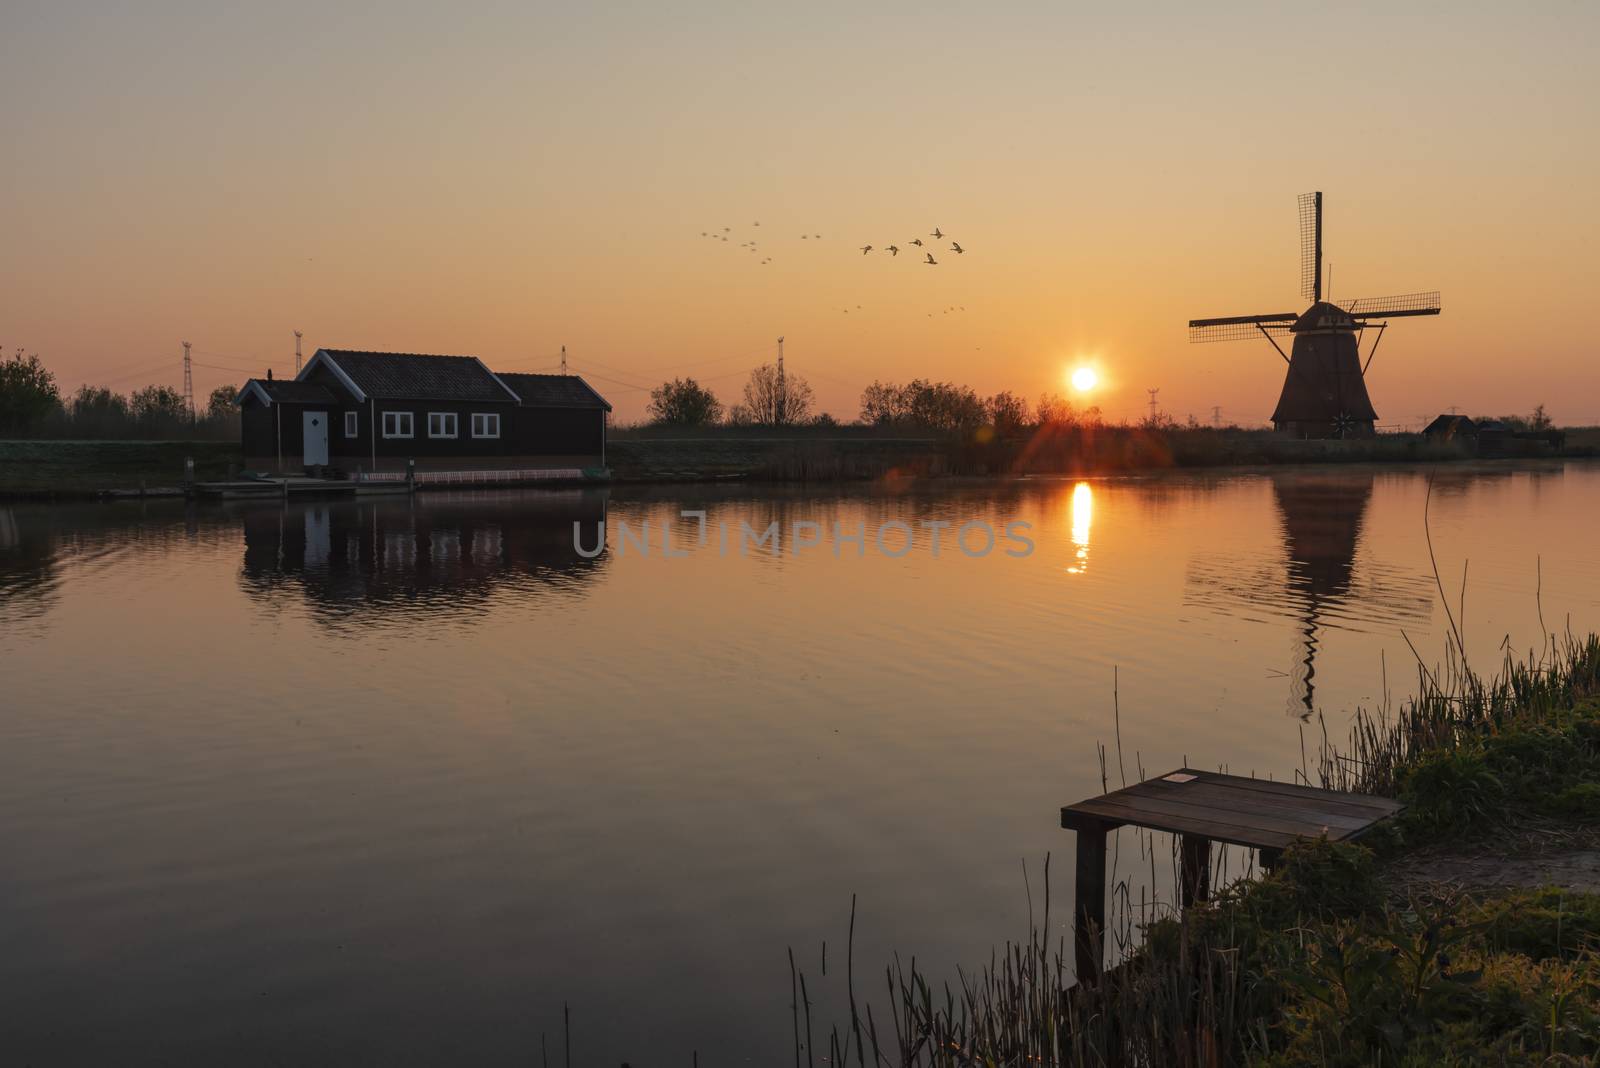 Loading platform at the edge with the calm water in the long canal during facing a windmill reflection in the burning sunrise color morning by ankorlight